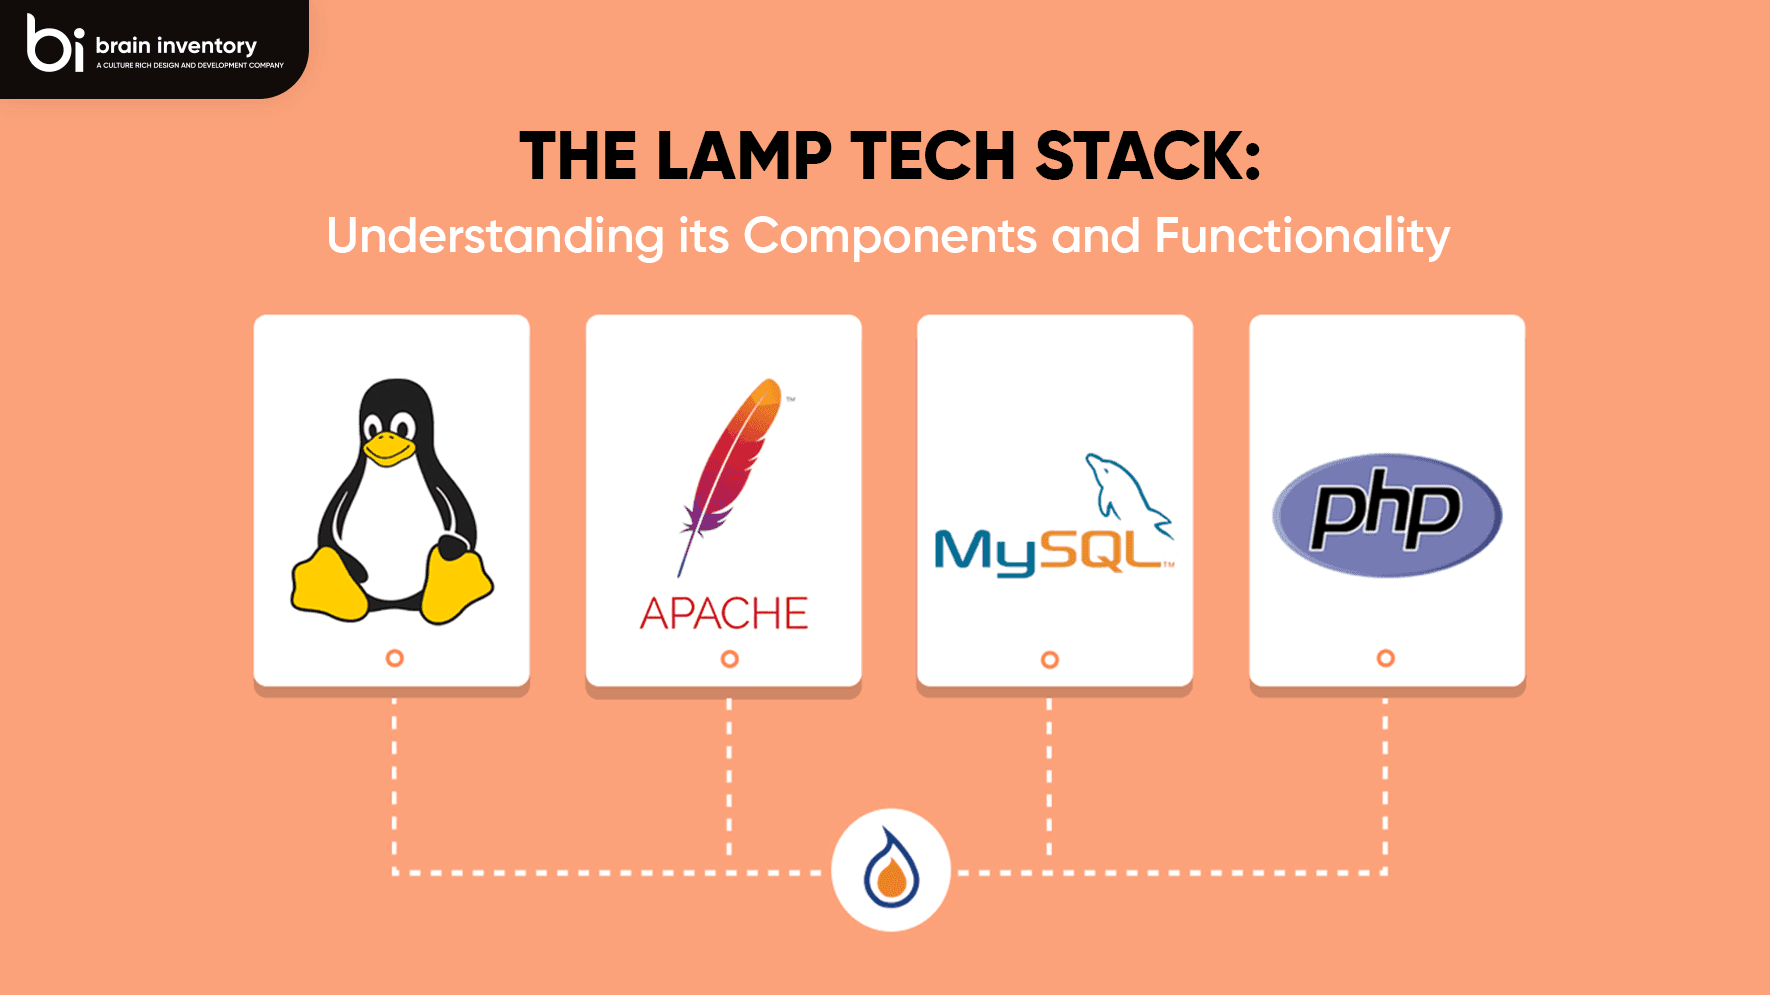 The LAMP Tech Stack: Understanding its Components and Functionality